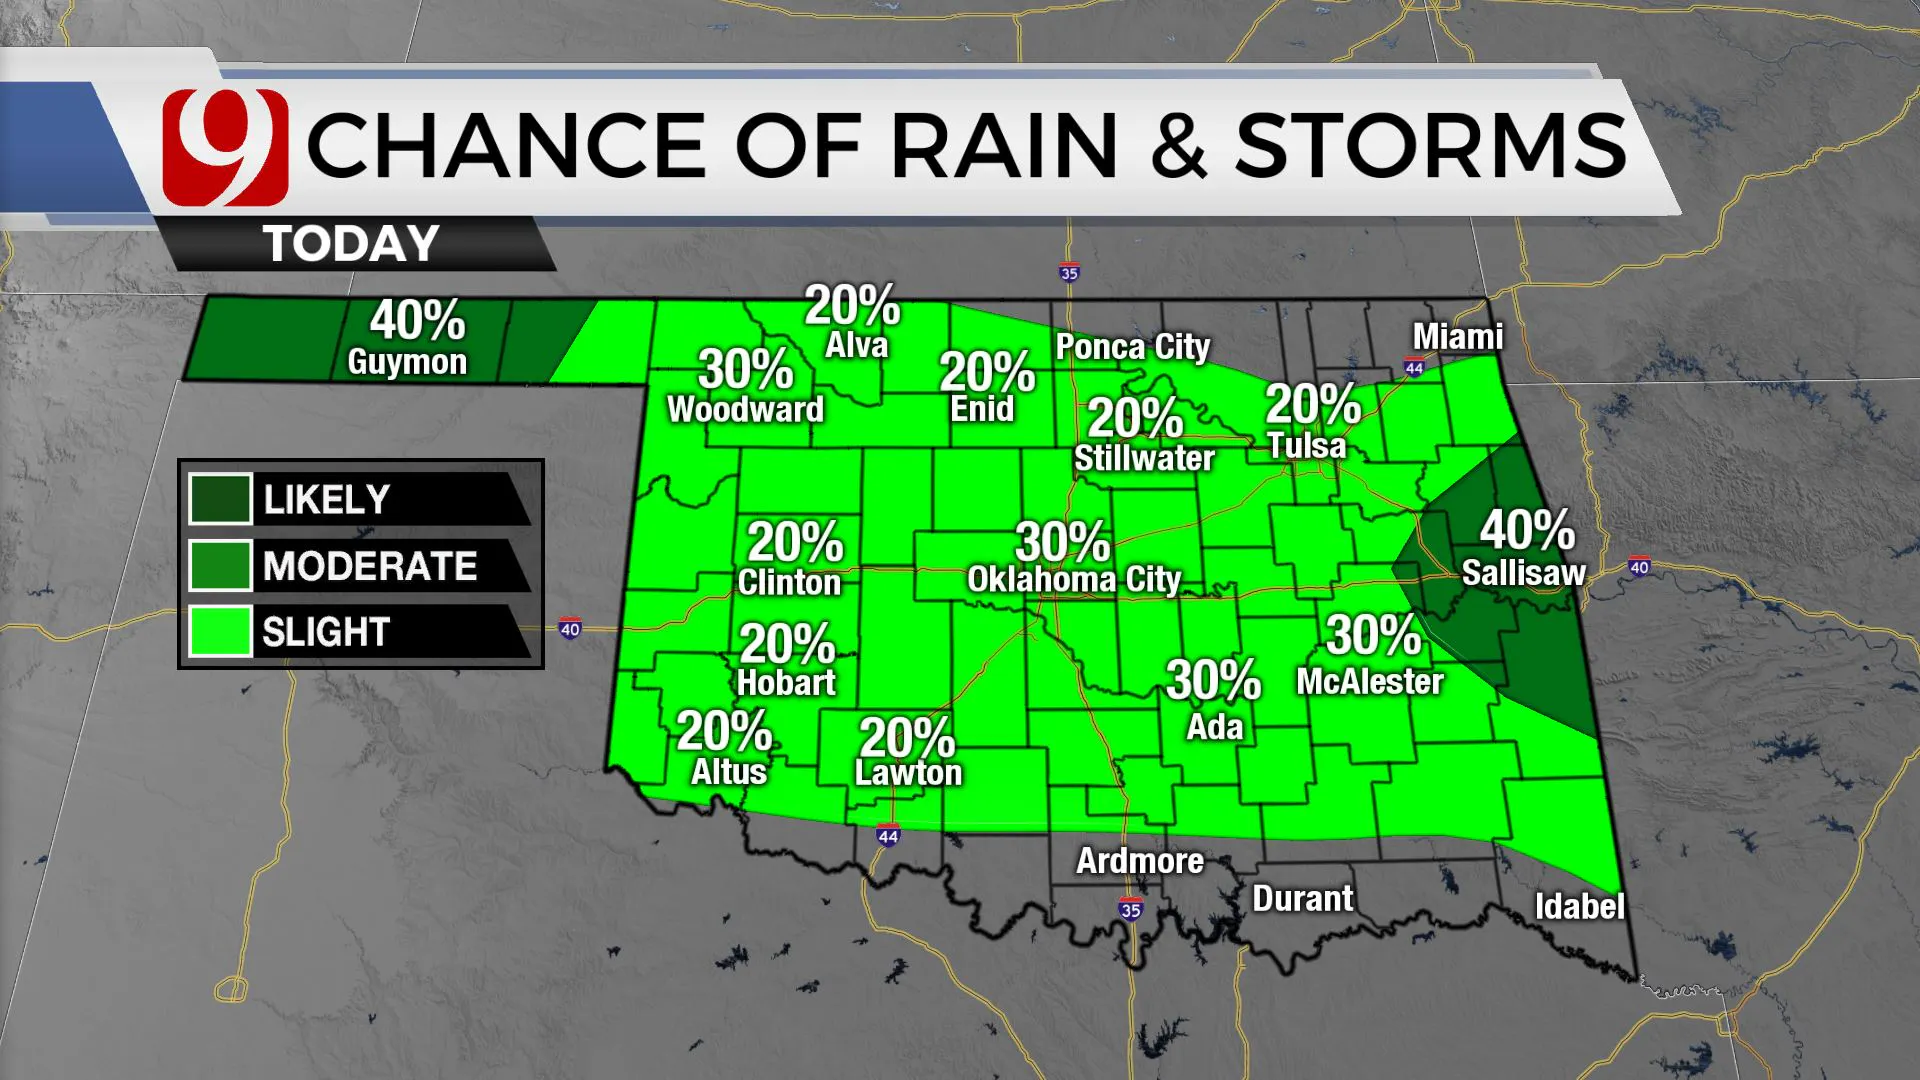 Chances of rain and storms across the state.